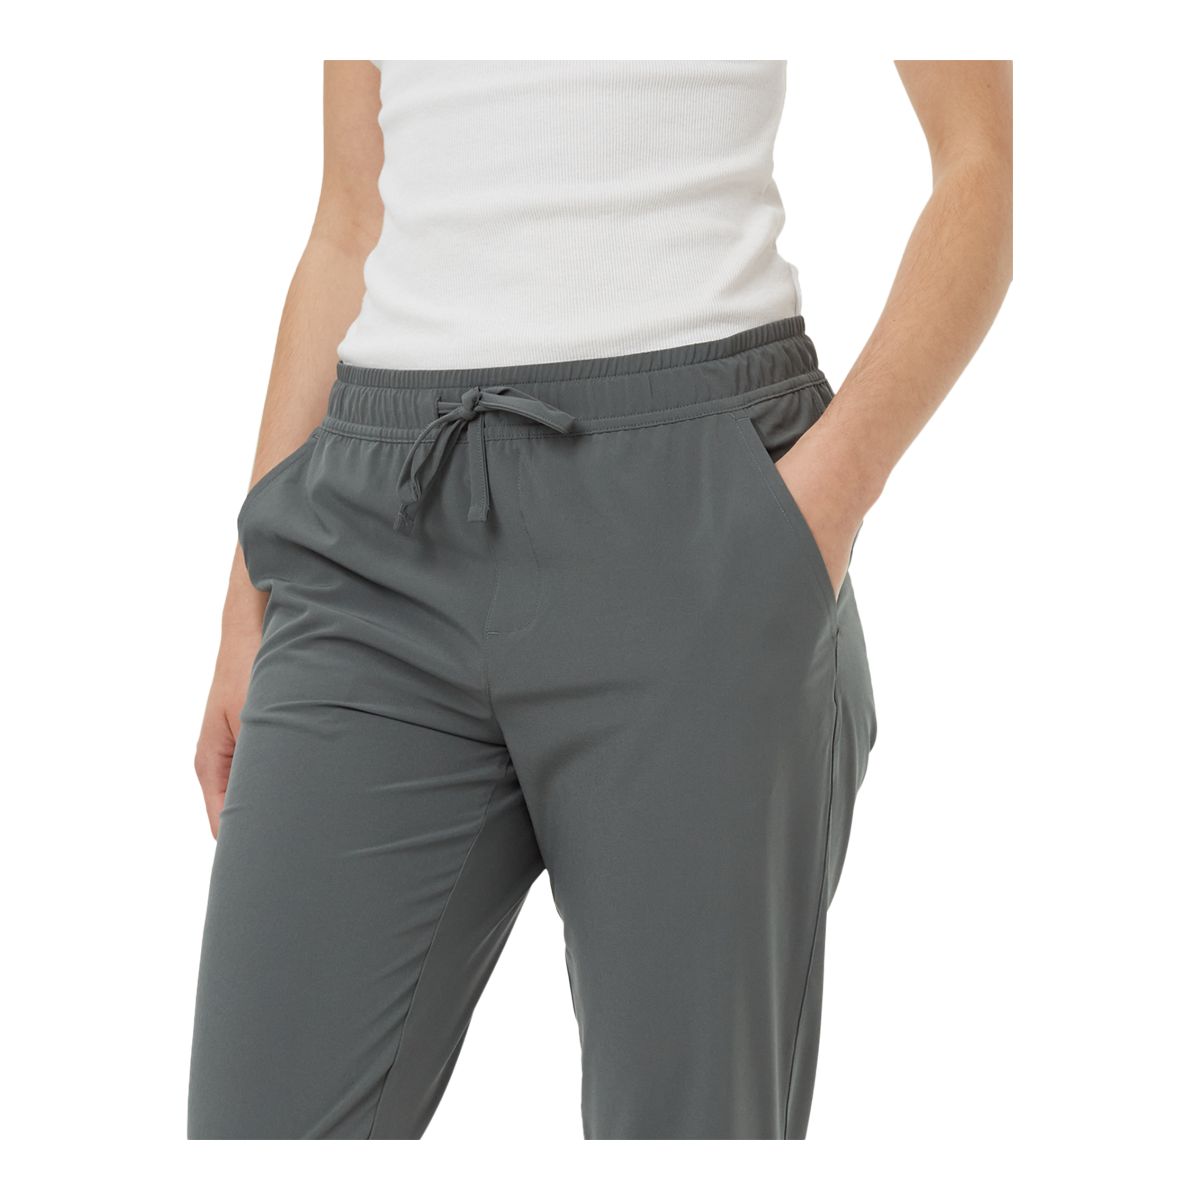 Tentree Women's Destination Pacific Jogger Pants, Casual, Tapered